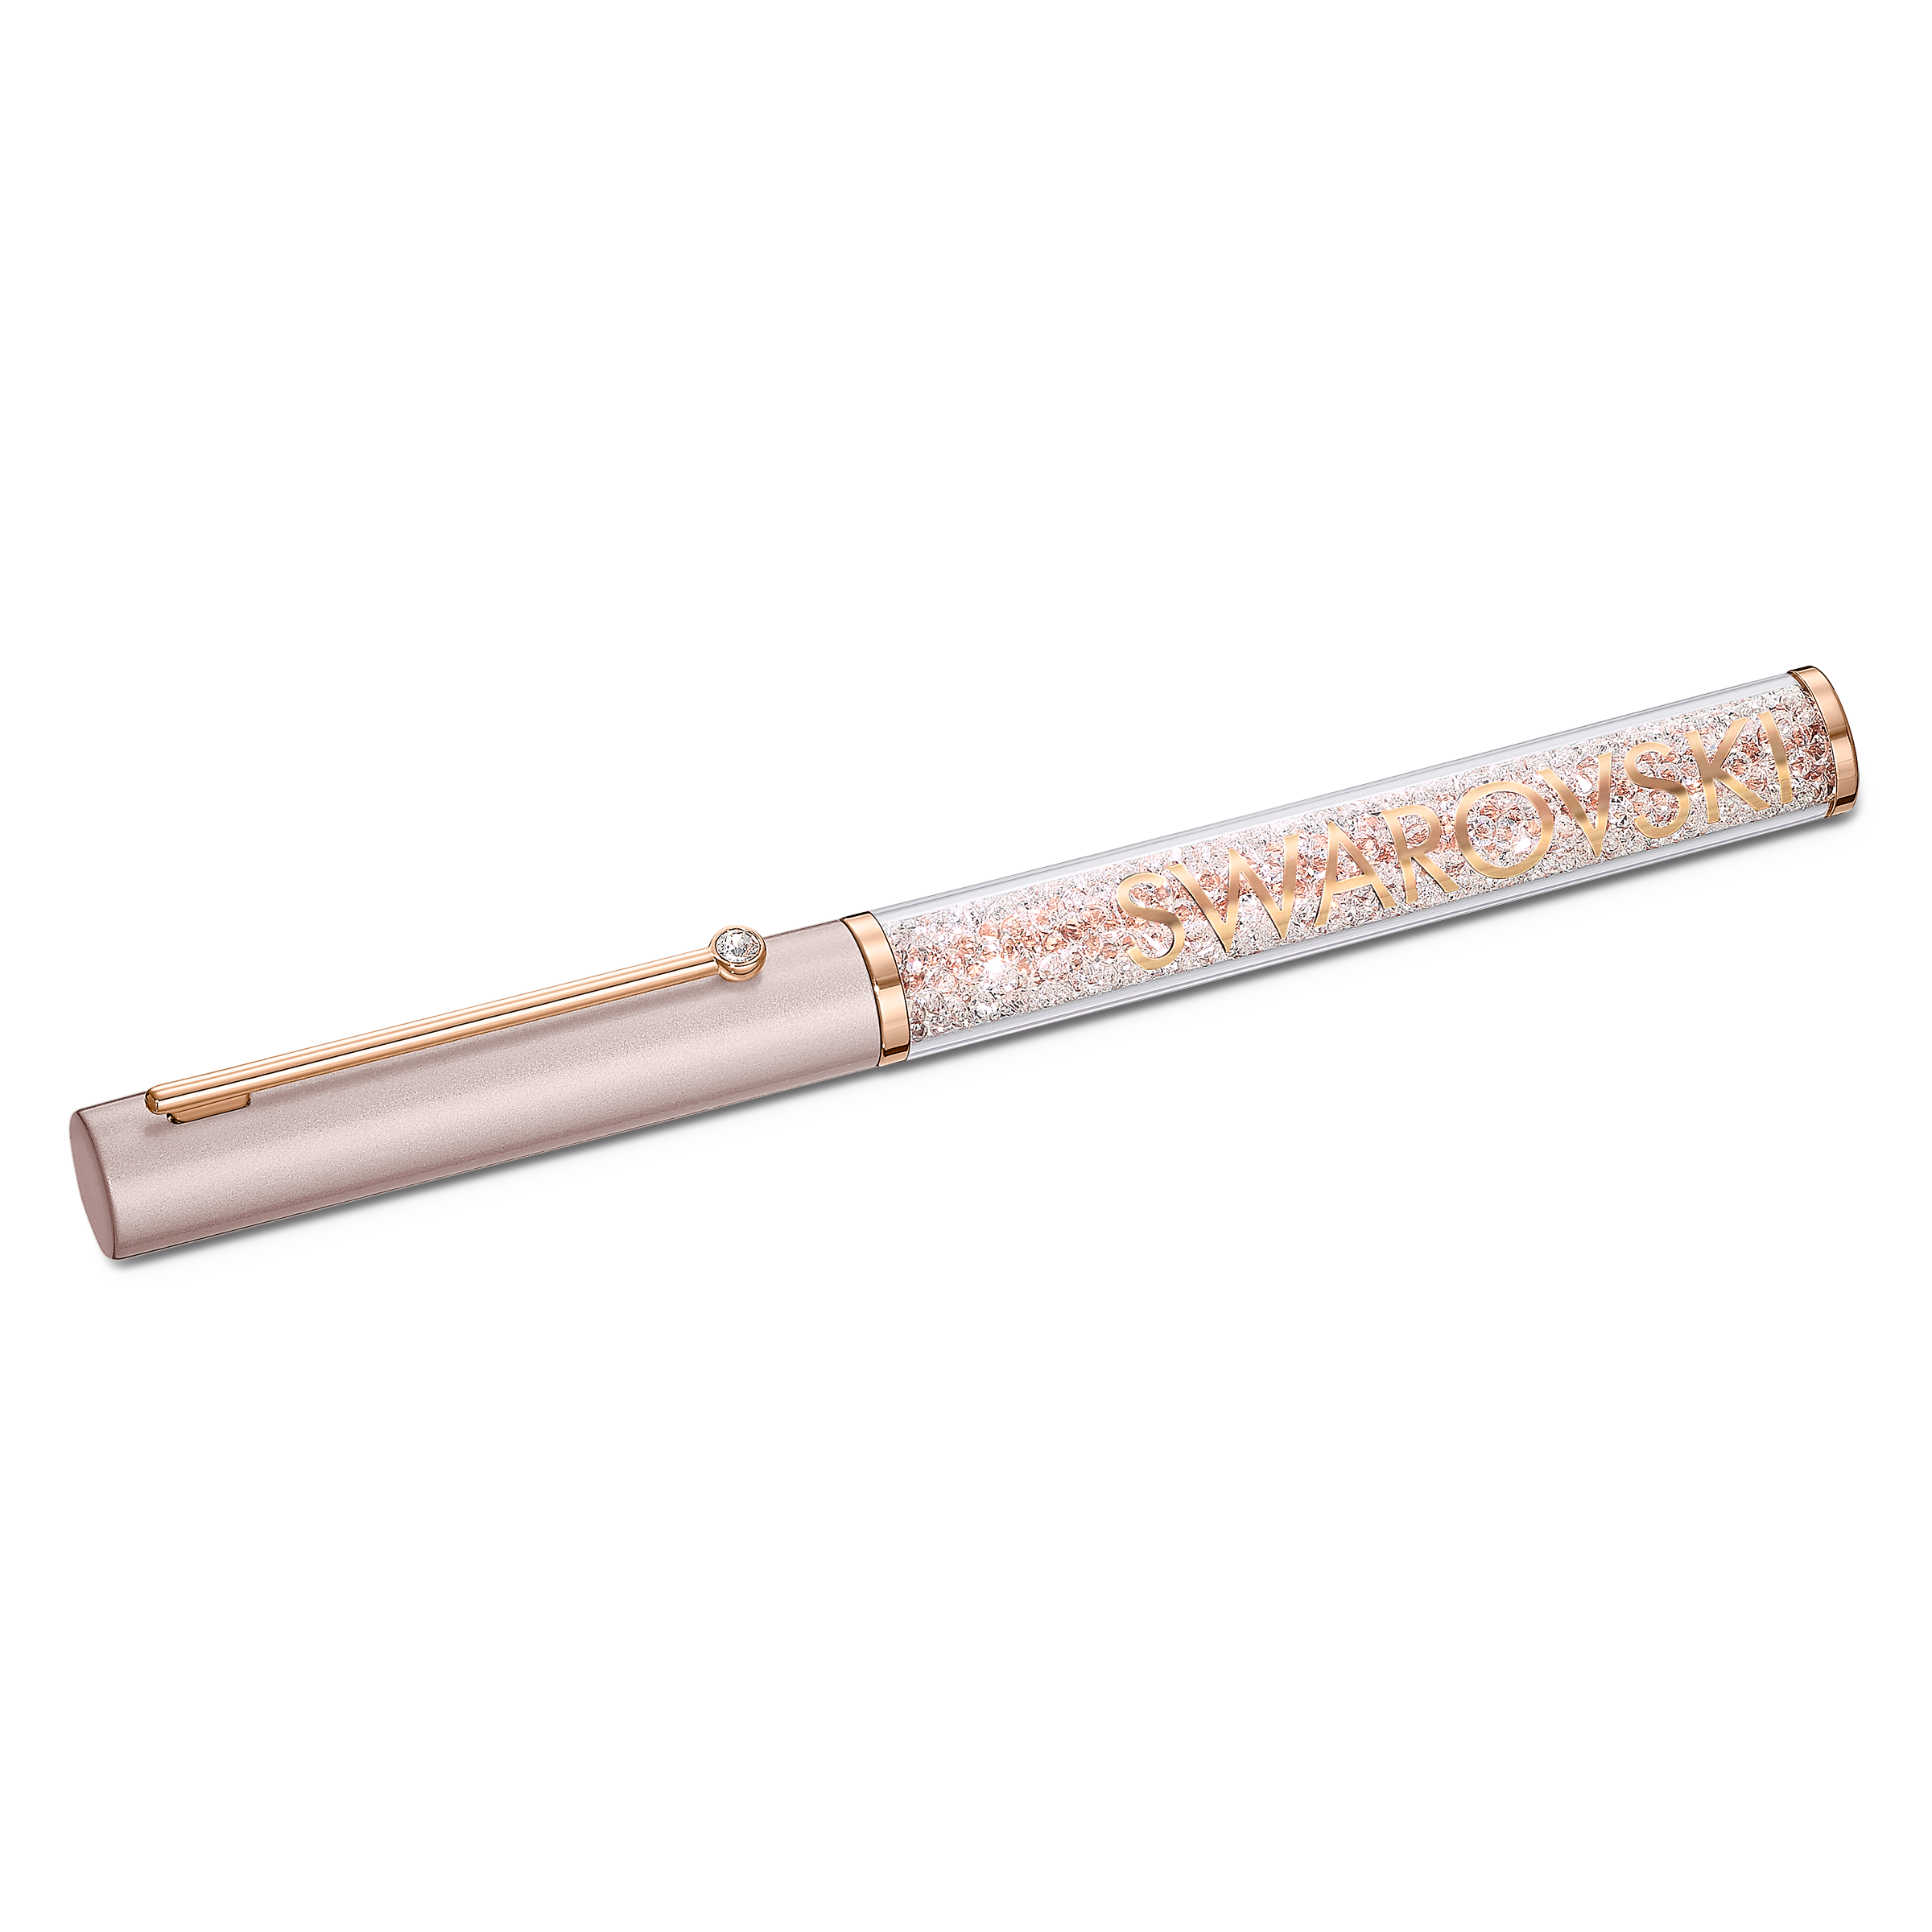 SWAROVSKI CRYSTALLINE GLOSS BALLPOINT PEN, ROSE GOLD TONE, PINK LACQUERED, ROSE GOLD-TONE PLATED 5568759